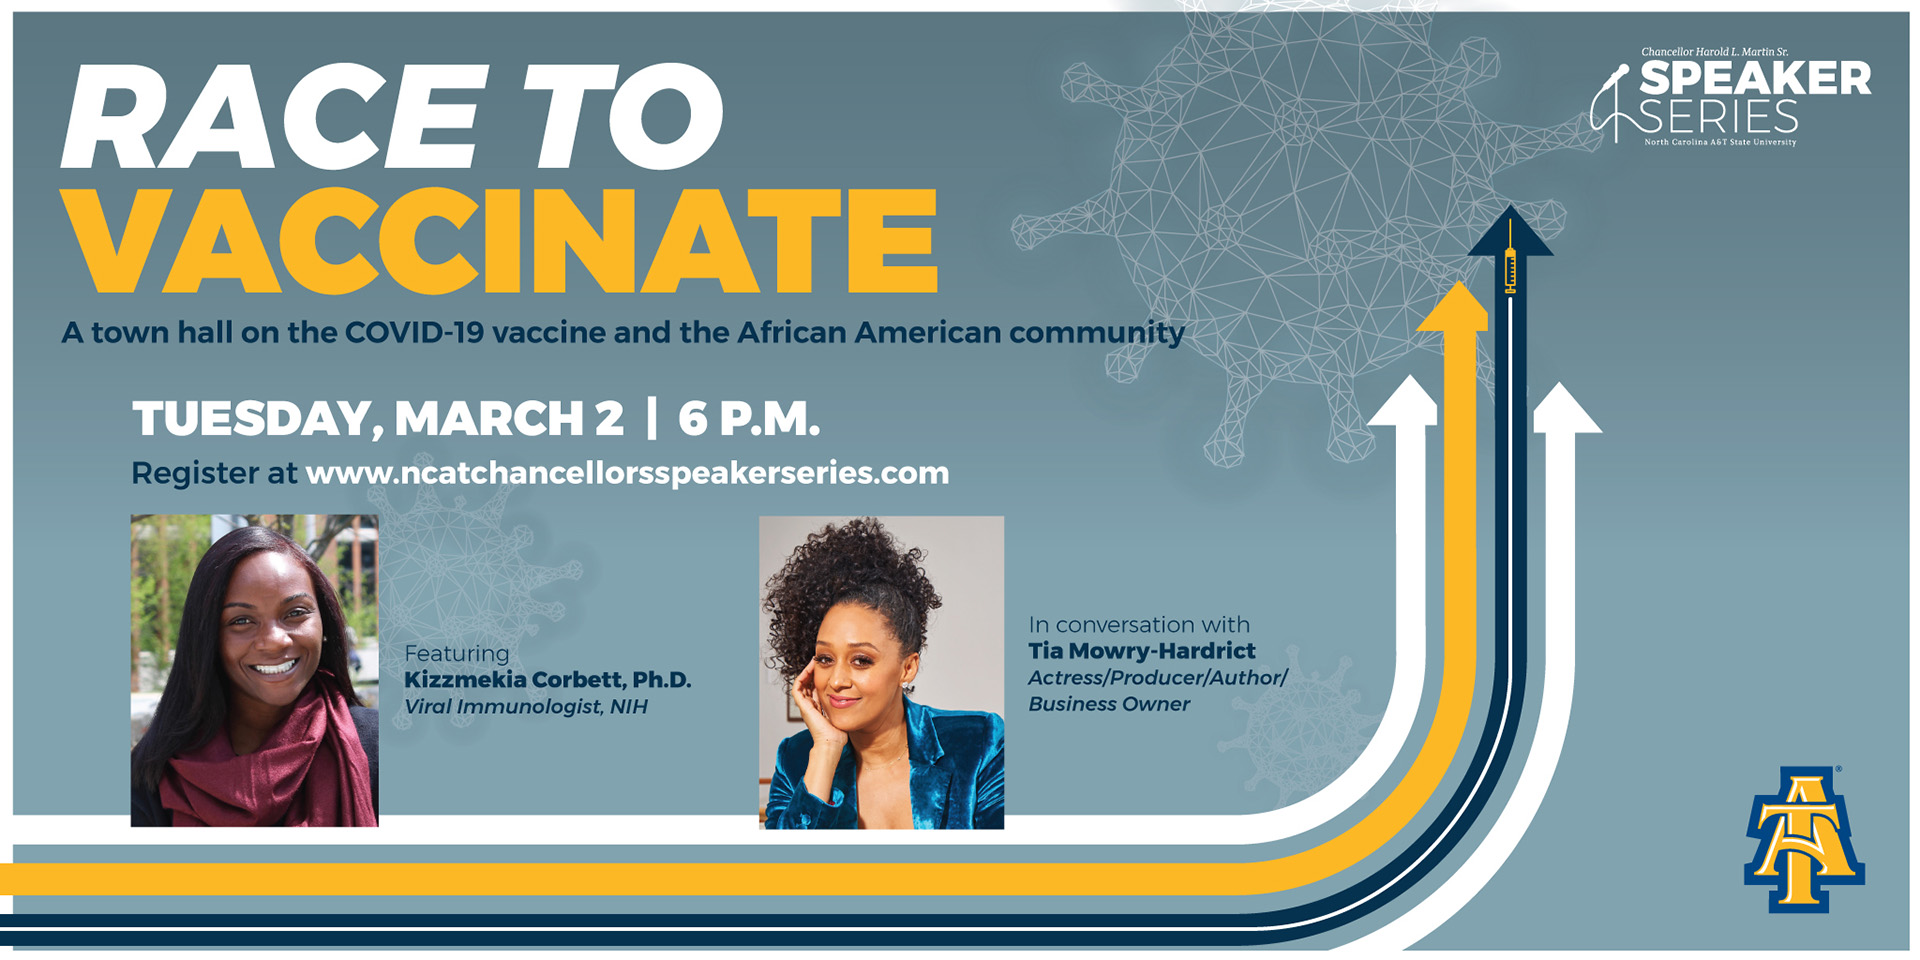 The Race to Vaccinate Speaker Series